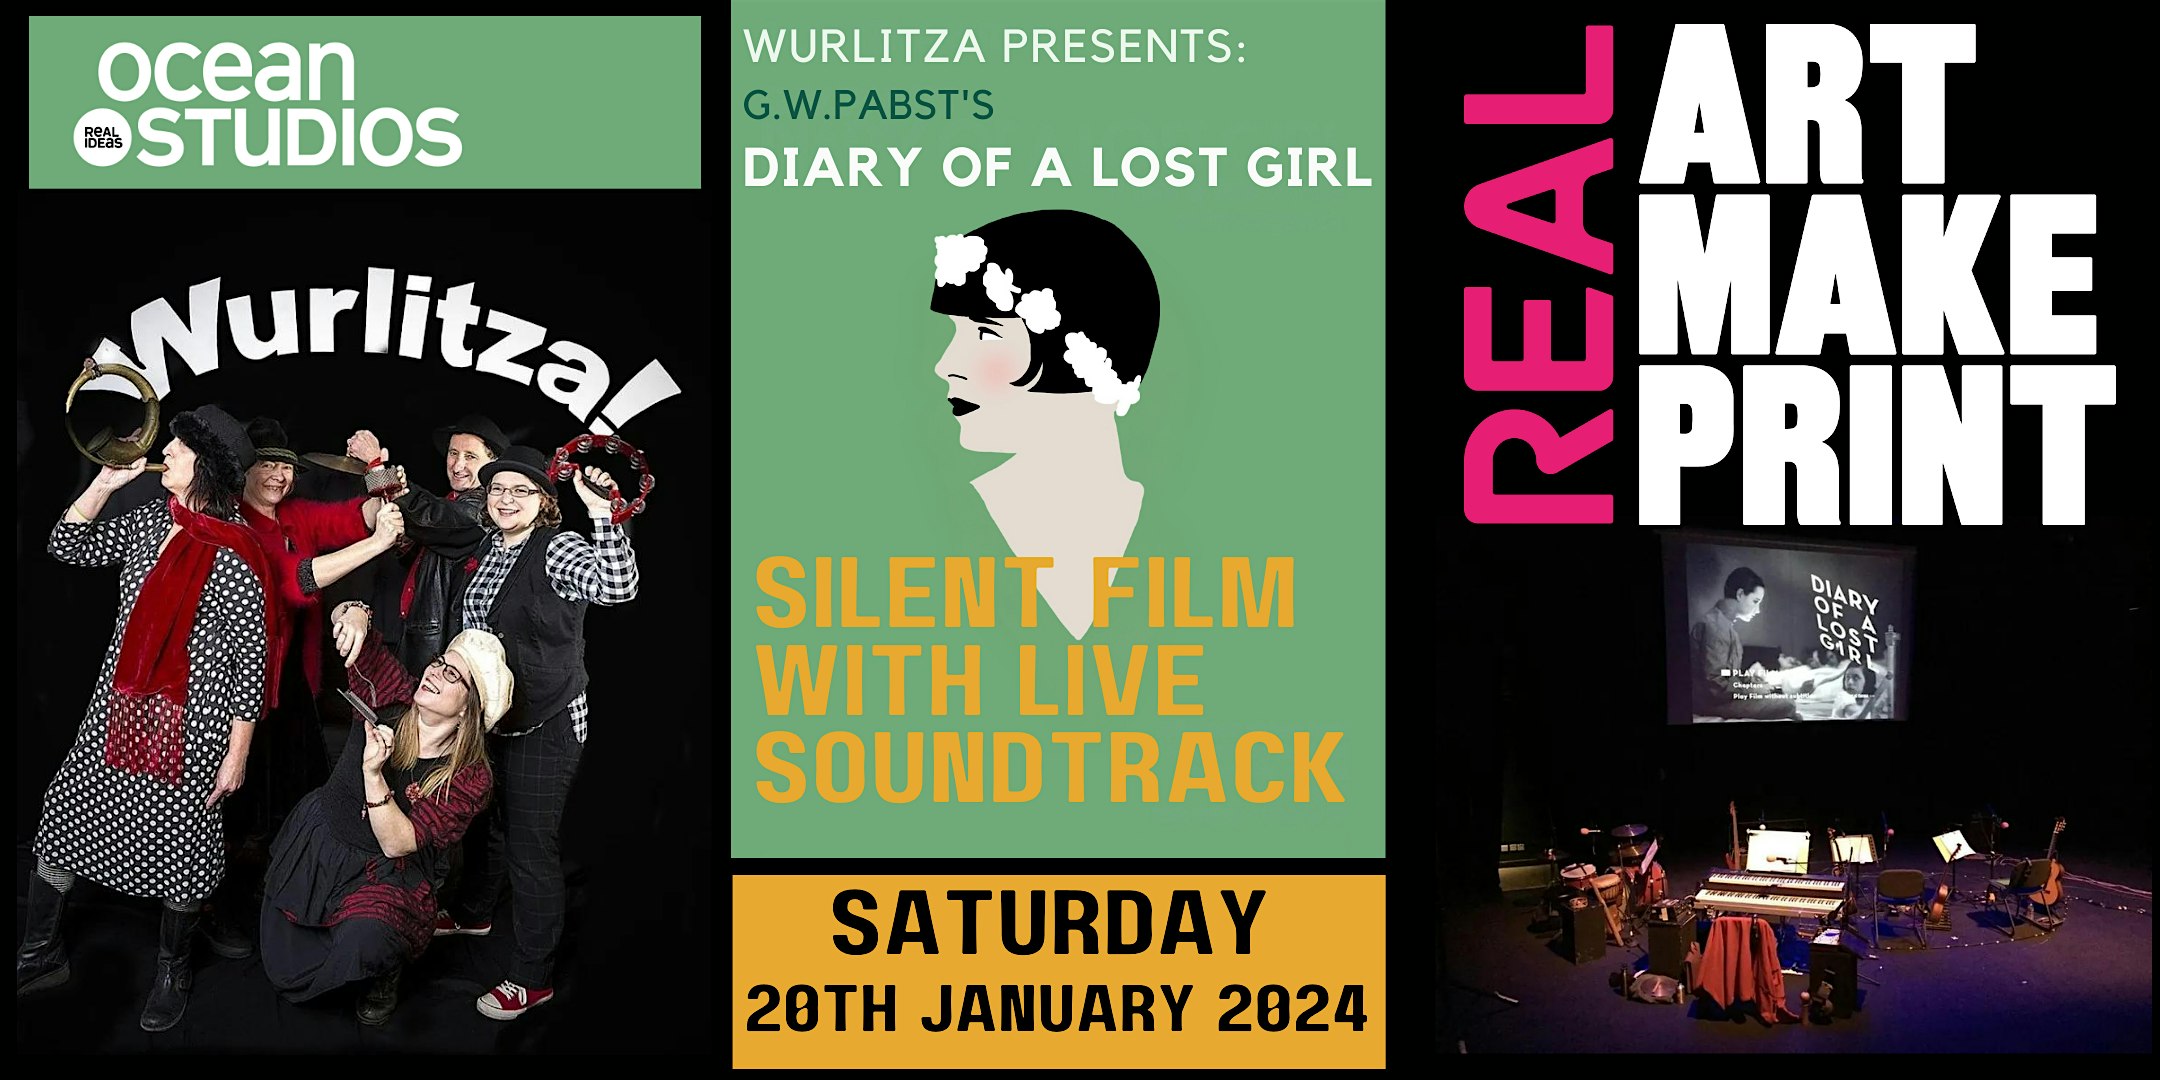 DIARY OF A LOST GIRL: SILENT FILM WITH LIVE SOUNDTRACK FROM WURLITZA